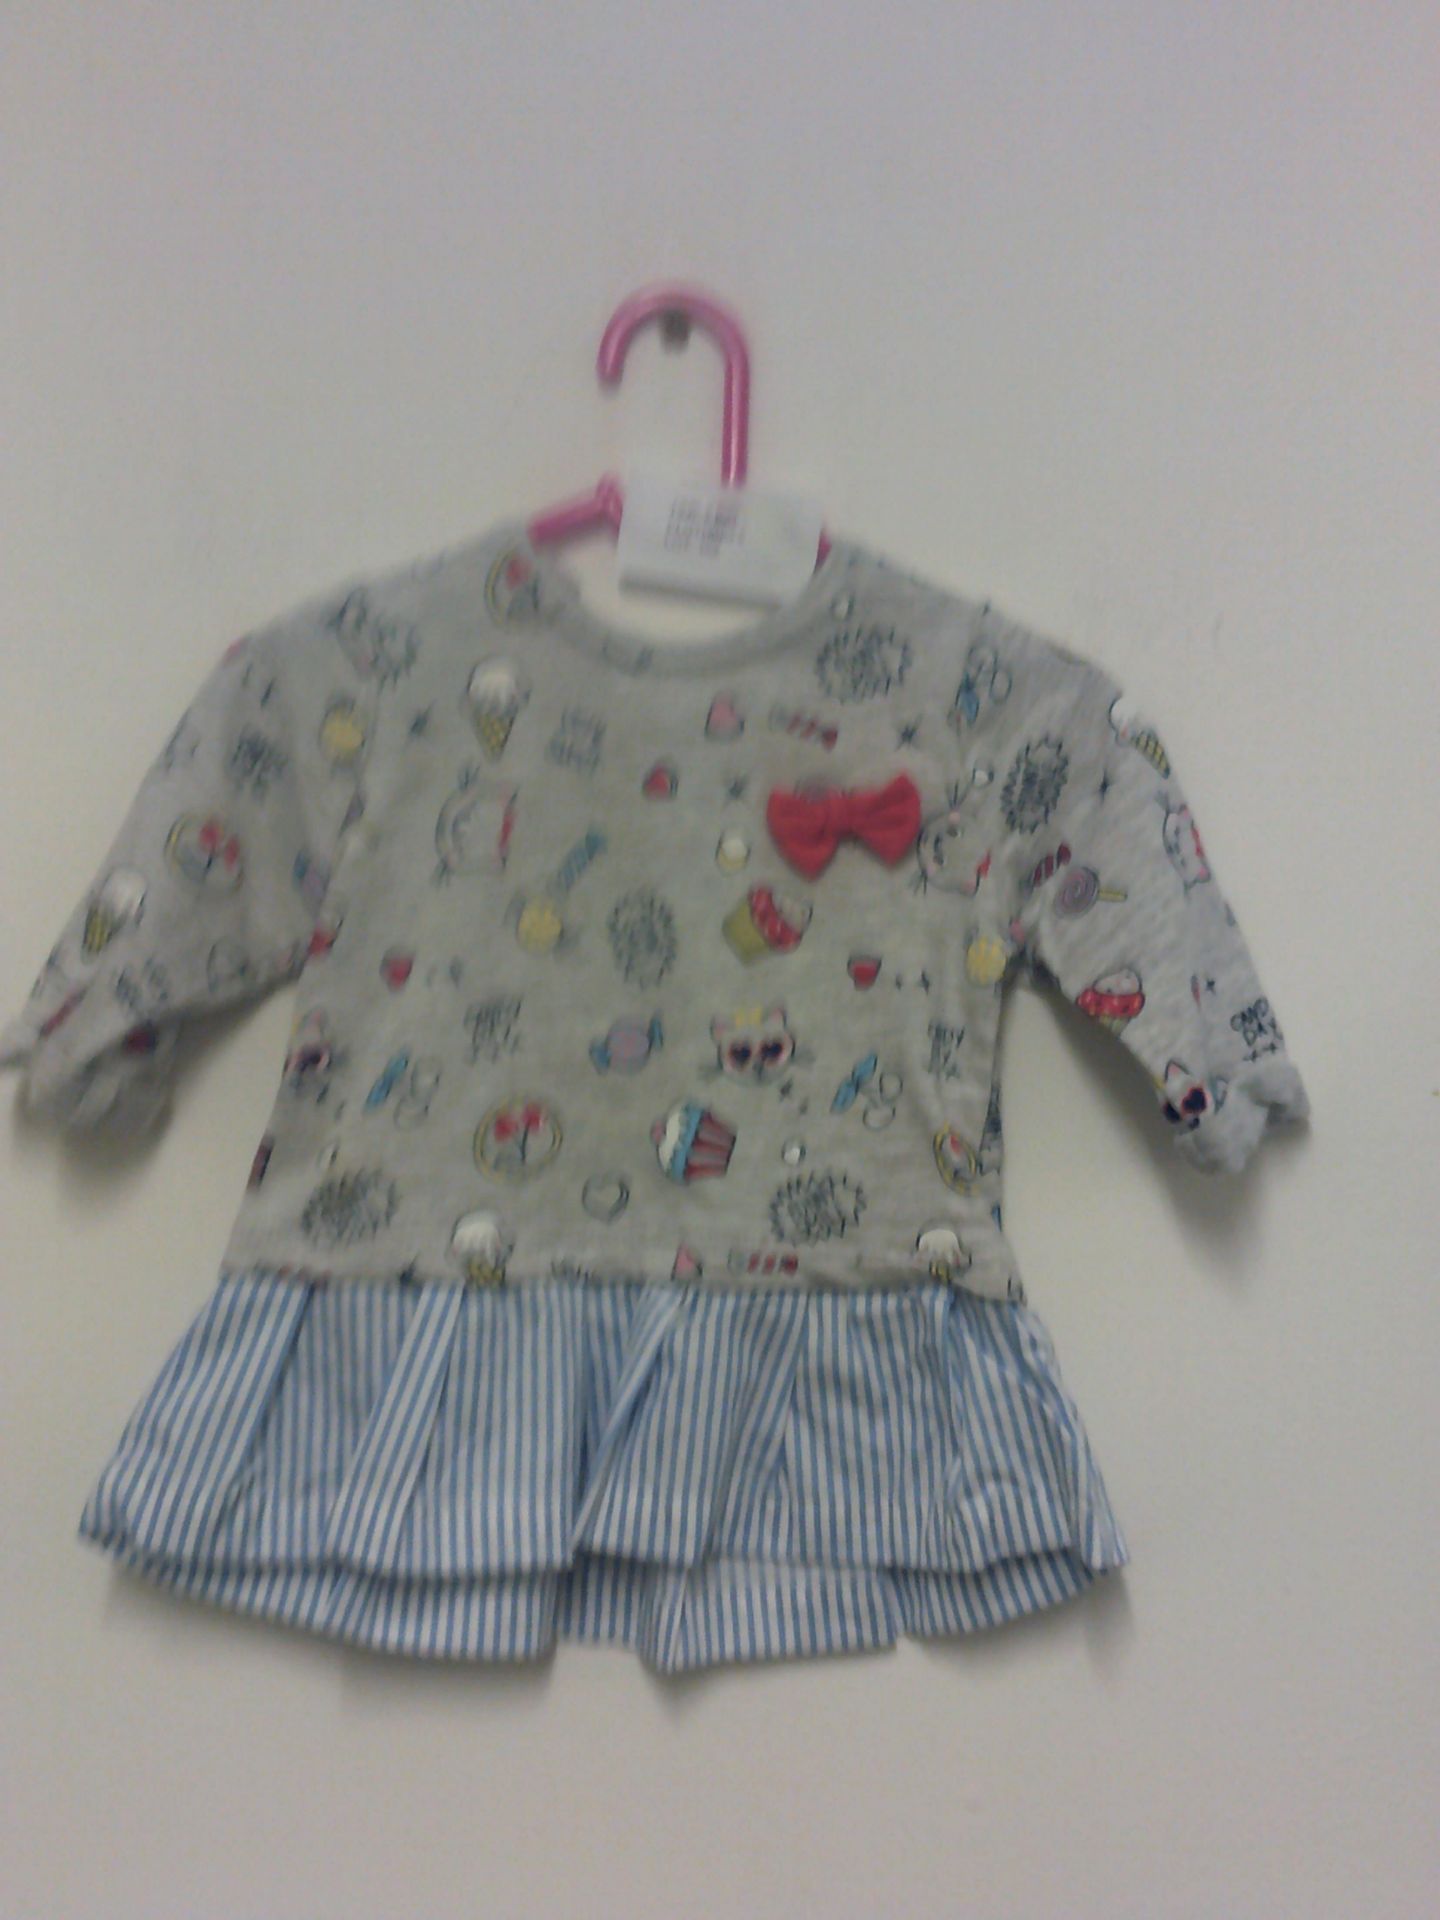 ERGEE BABIES TUNIC TOP AGE 9/12MTHS